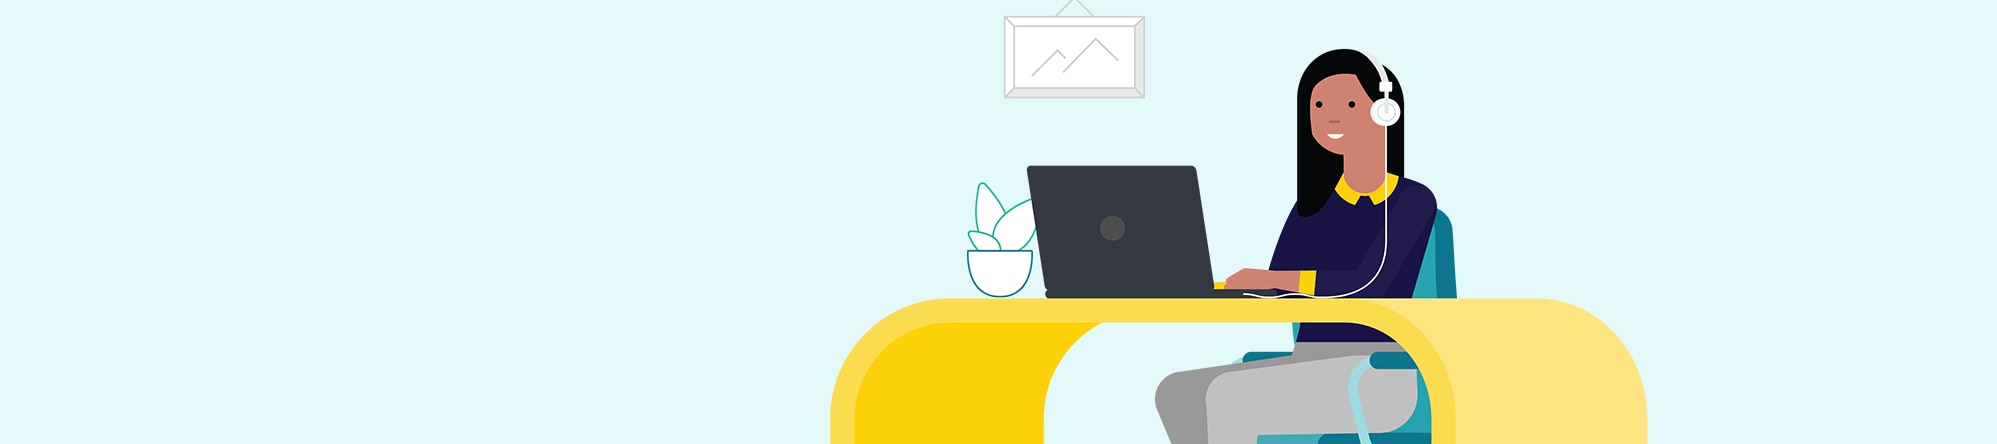 Illustration of a person sitting at a yellow desk with headphone on at their laptop